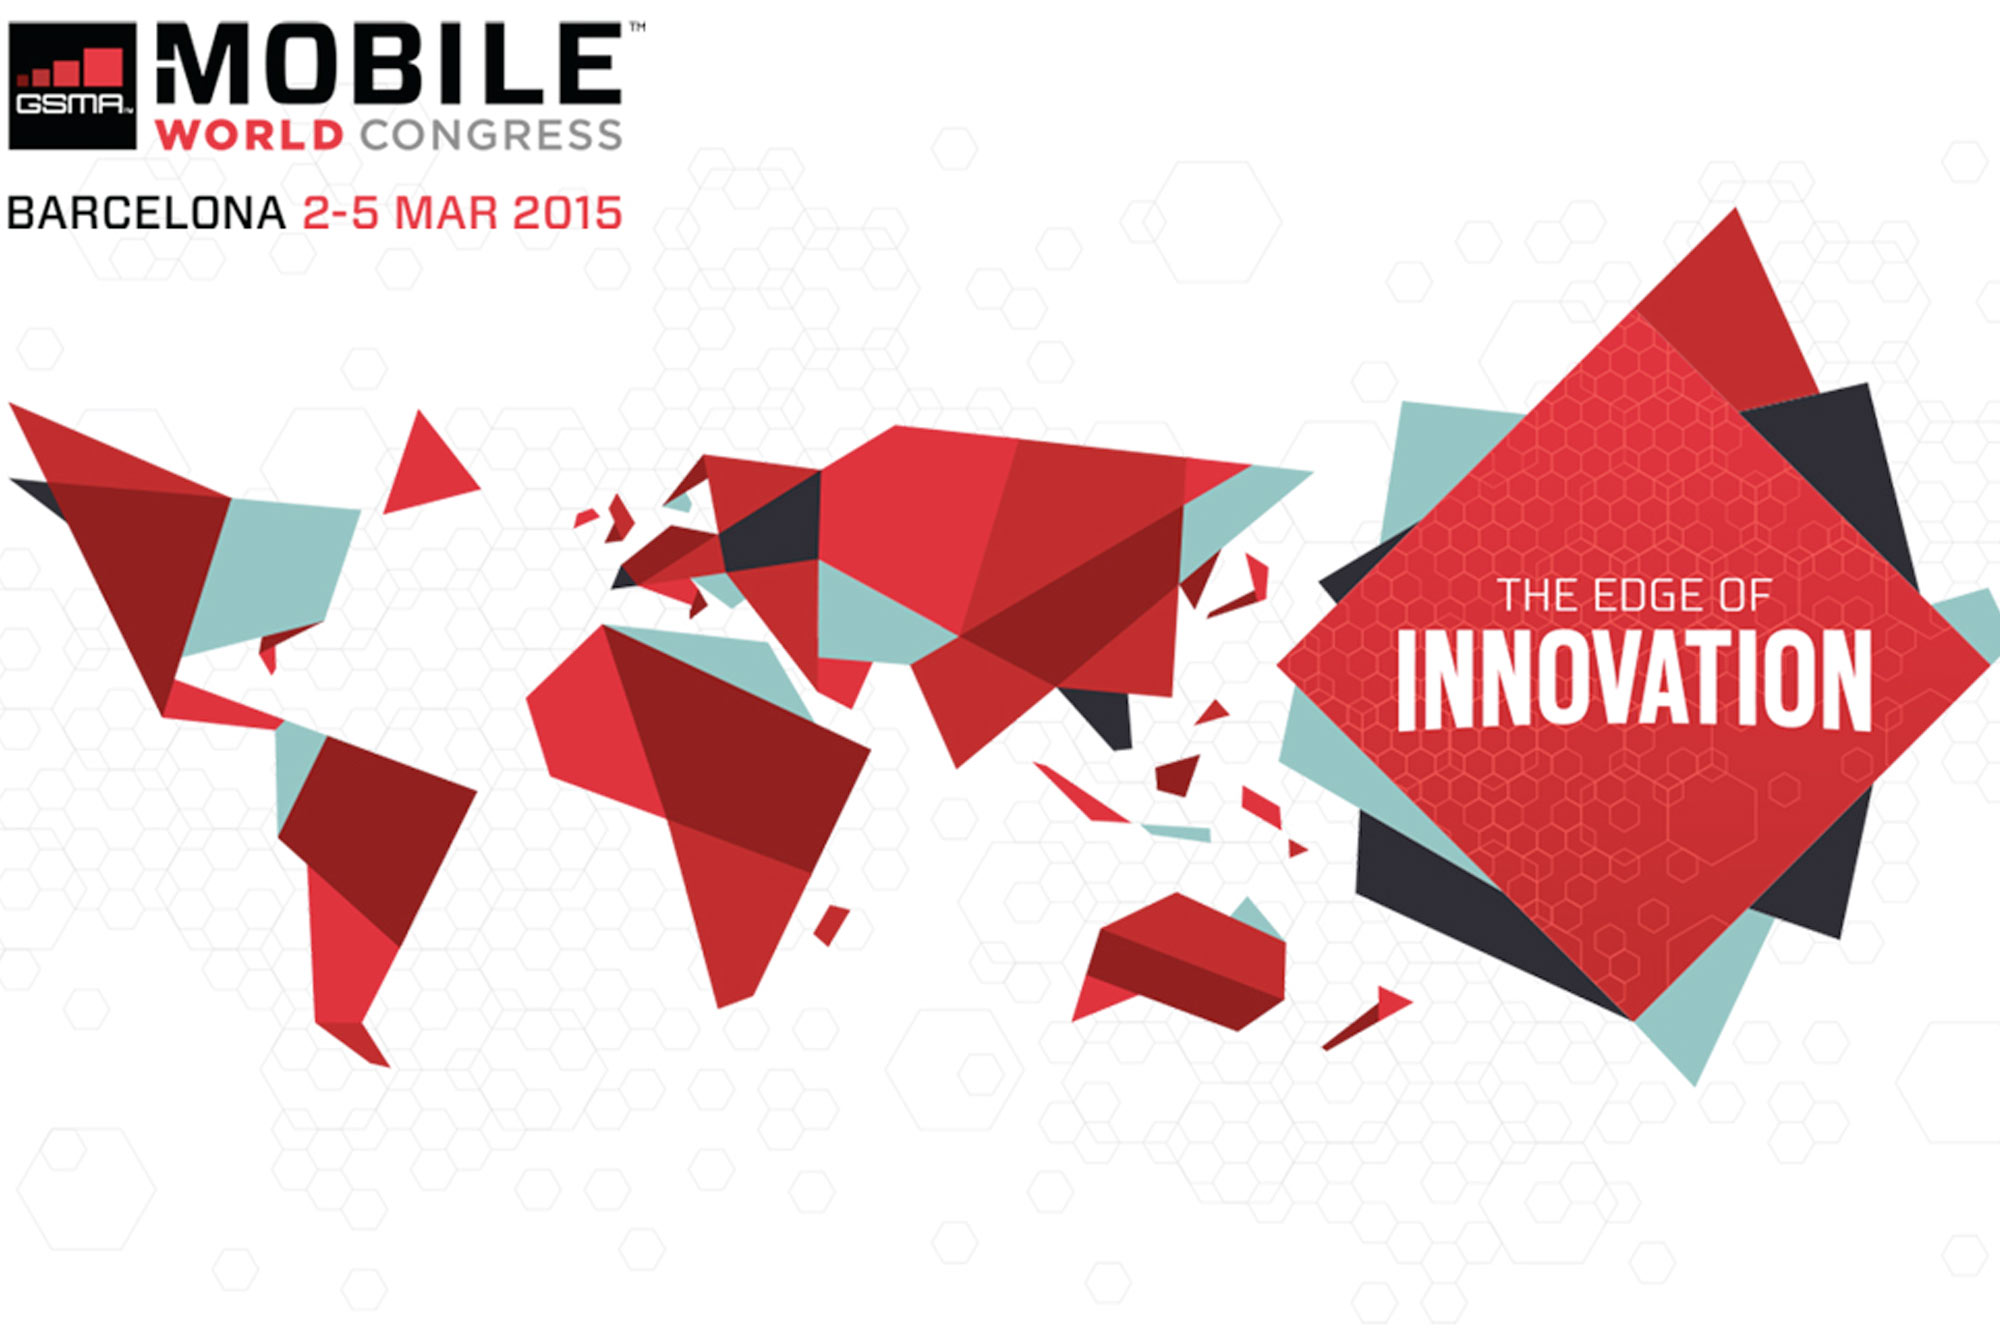 MobiWeb at MWC 2015, the world's greatest mobile innovation event